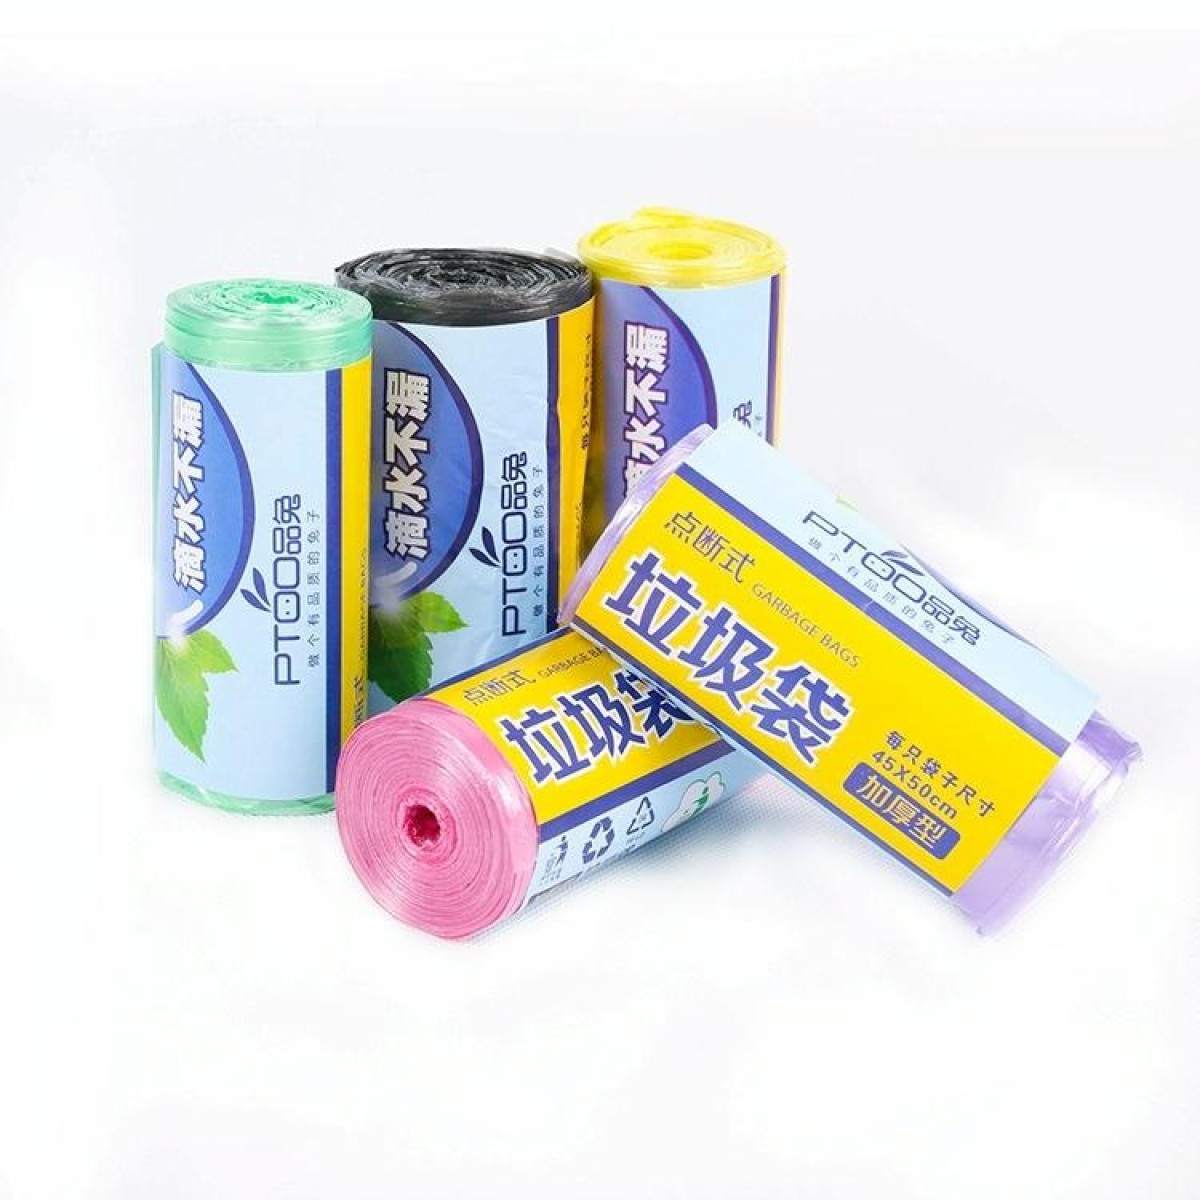 1 Rolls Household Colour Thickening Big Garbage Bags (30 PCS Per Roll), Random Color Delivery, Size:45*50cm